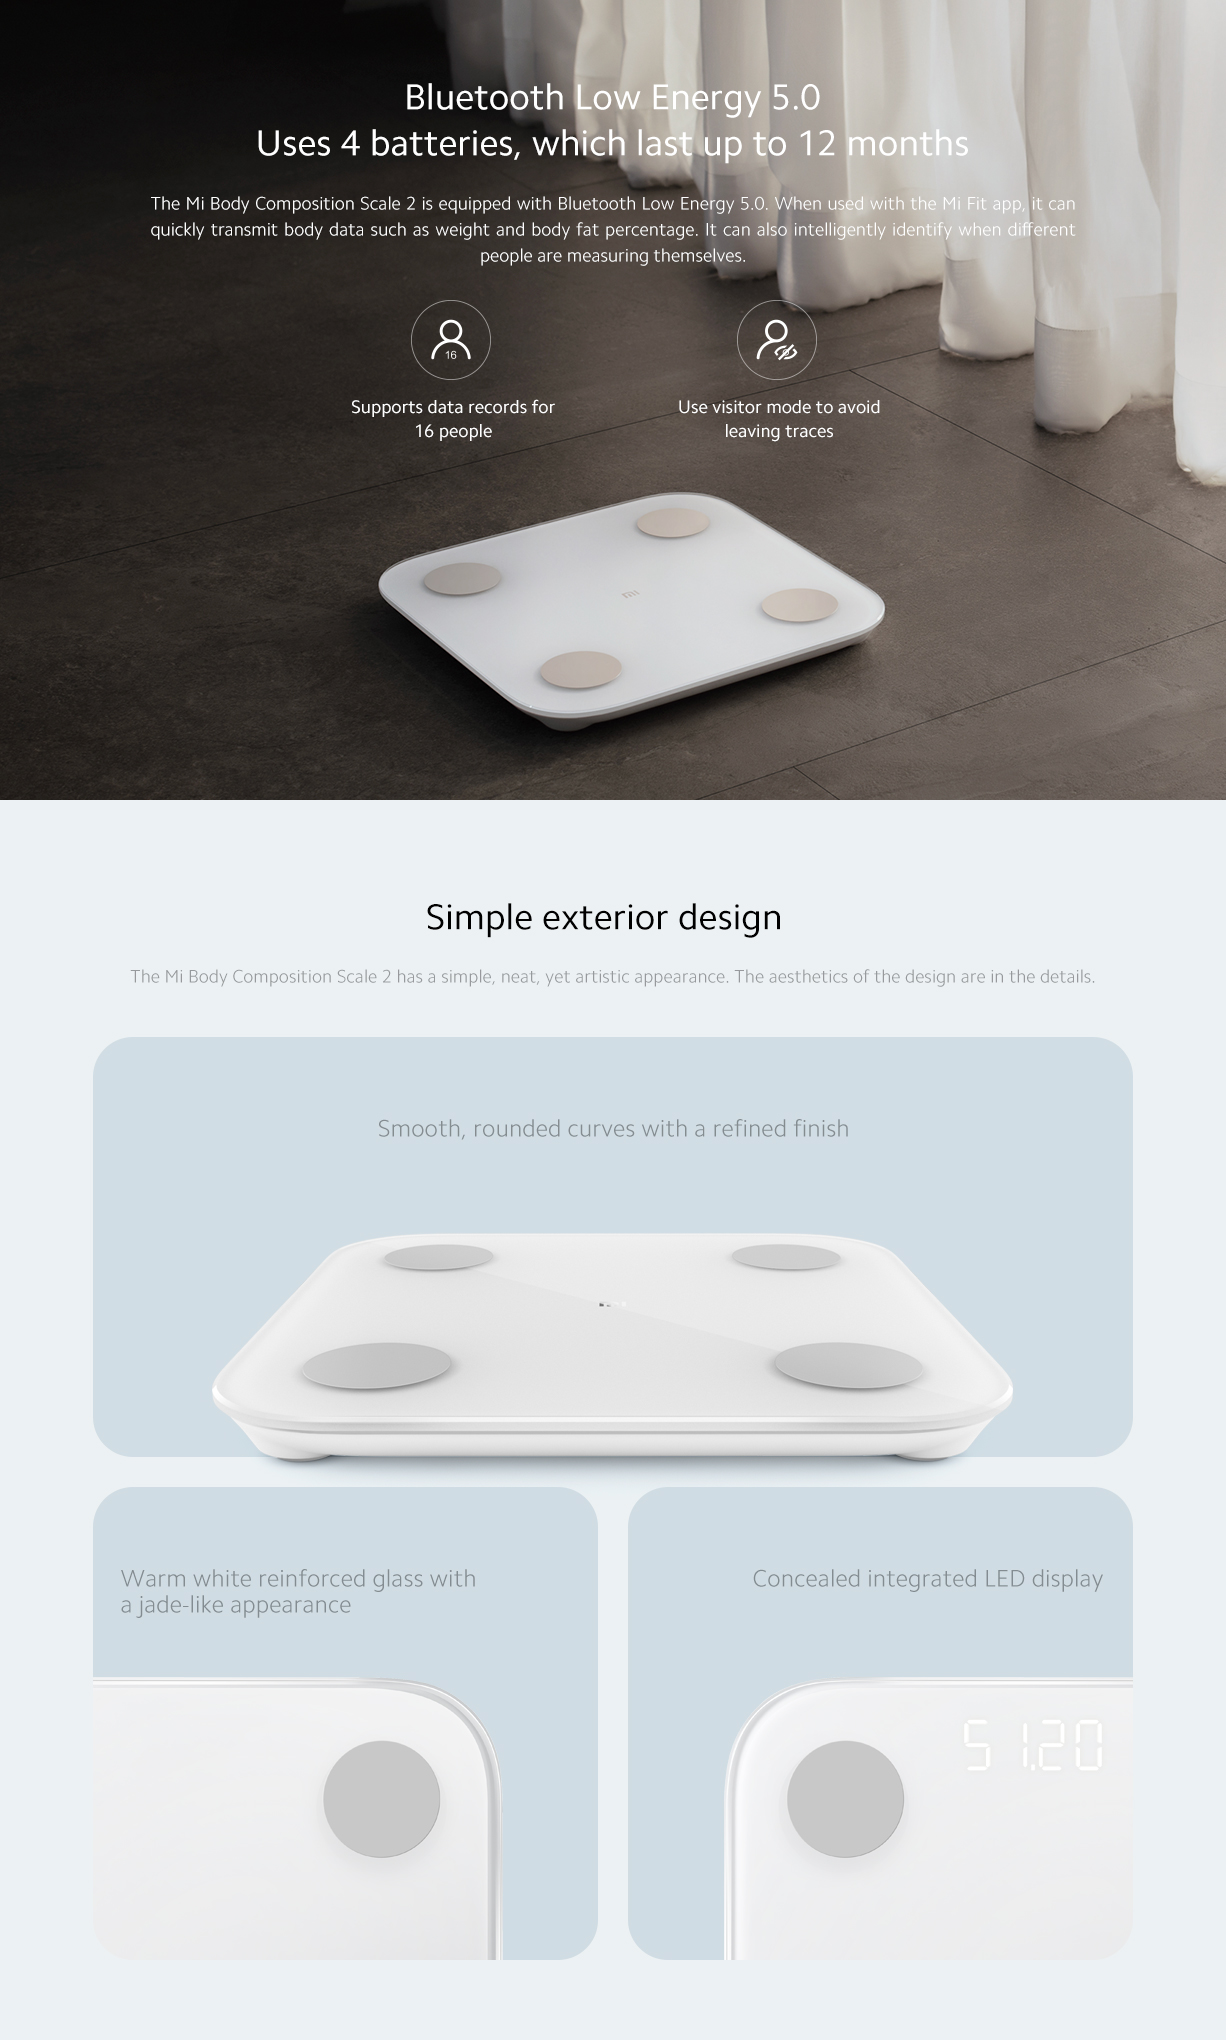 725E677D4319Fe9C6197F253B1Af07F0 Xiaomi The Xiaomi Fans Are In Luck Because The Asian Brand Has Improved Its Famous Xiaomi Mi Scale 2 Scale And They Bring Us The New Xiaomi Mi Body Composition Scale 2, An Improvement That Makes An Already Essential Scale An Article That Should Not Be Missing In Your Home. Designed Especially For All Those Who Want To Know Their Body In Detail, This New Xiaomi Scale Is Designed To Be Used With The Mi Fit Application, Which Will Allow Us To Have All The Data Inside Us. &Nbsp; Xiaomi Xiaomi Mi Body Composition Scale 2